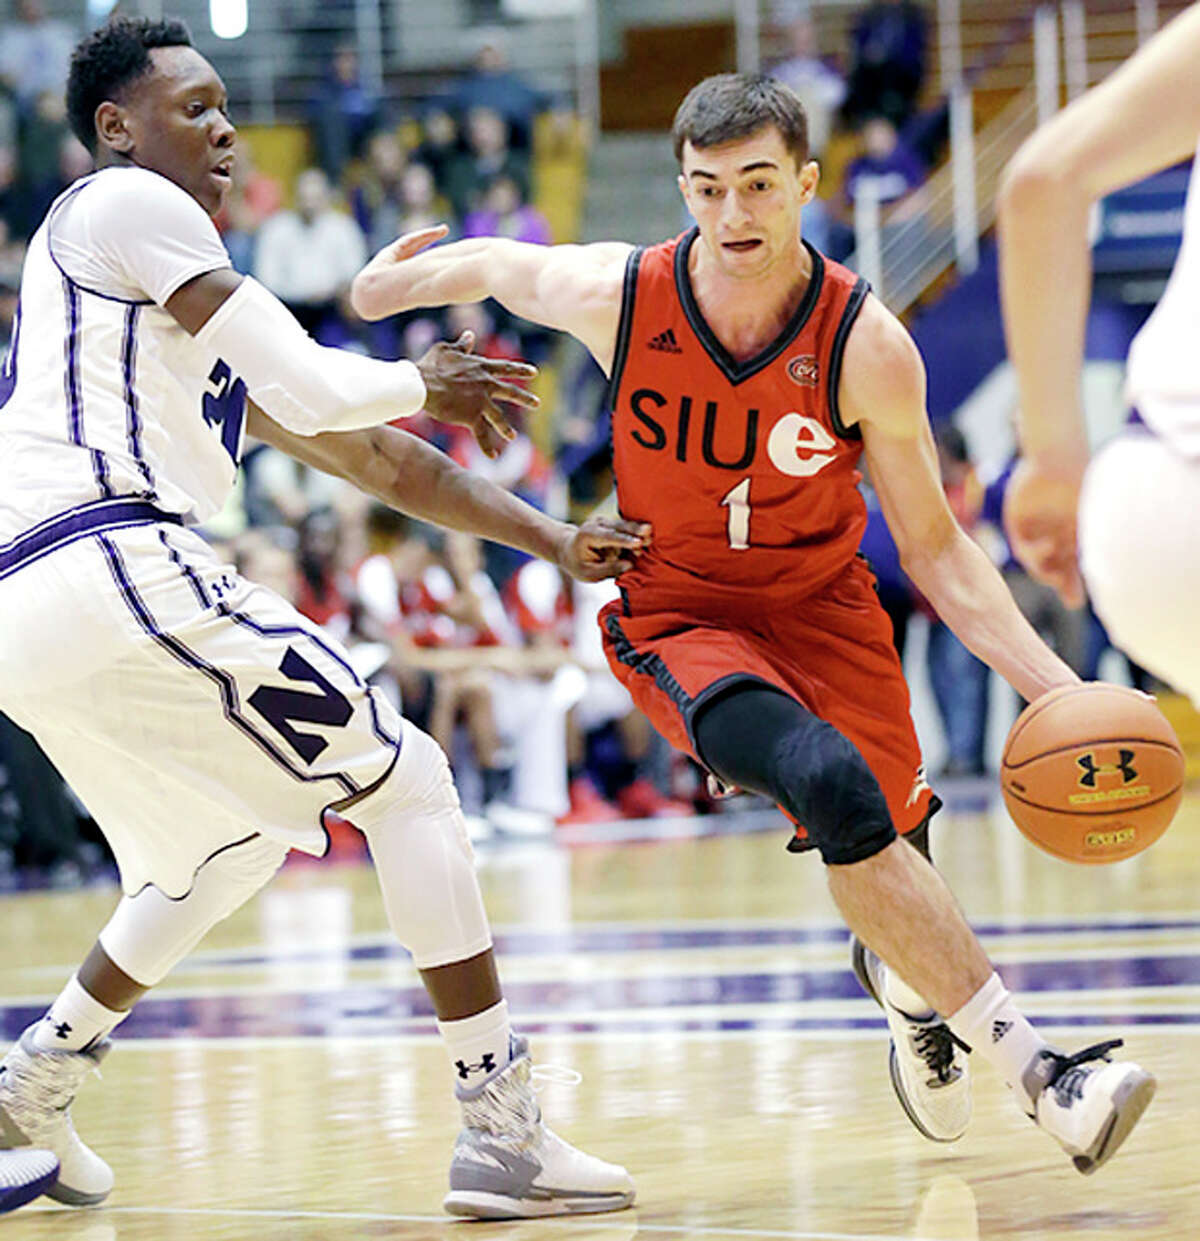 SIUE guard Burak Eslik, right, drives against Northwestern’s Scottie Lindsey during the first half Saturday Evanston. Eslik, a transfer frm LCCC, scored 13 points in the Cougars’ 81-56 loss.